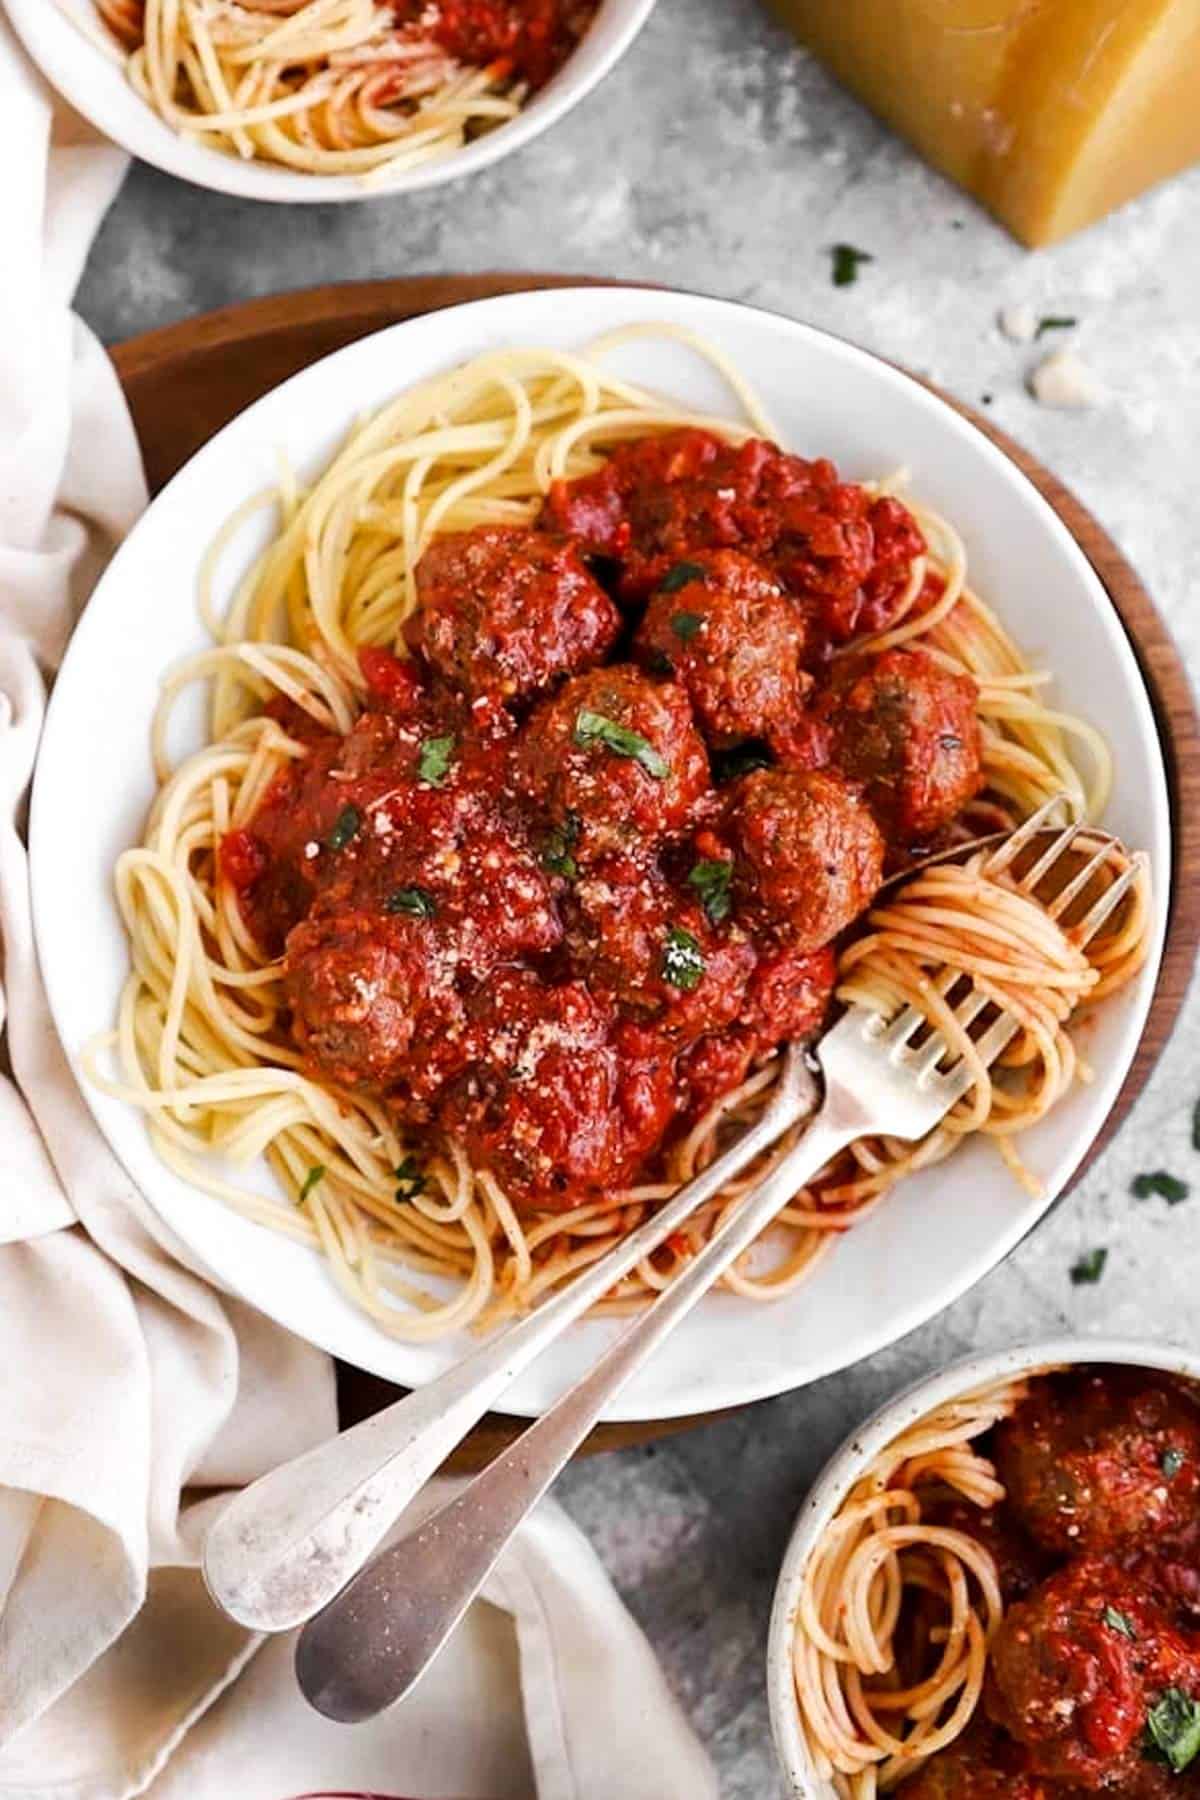 spaghetti and Italian meatballs on plate and in bowls